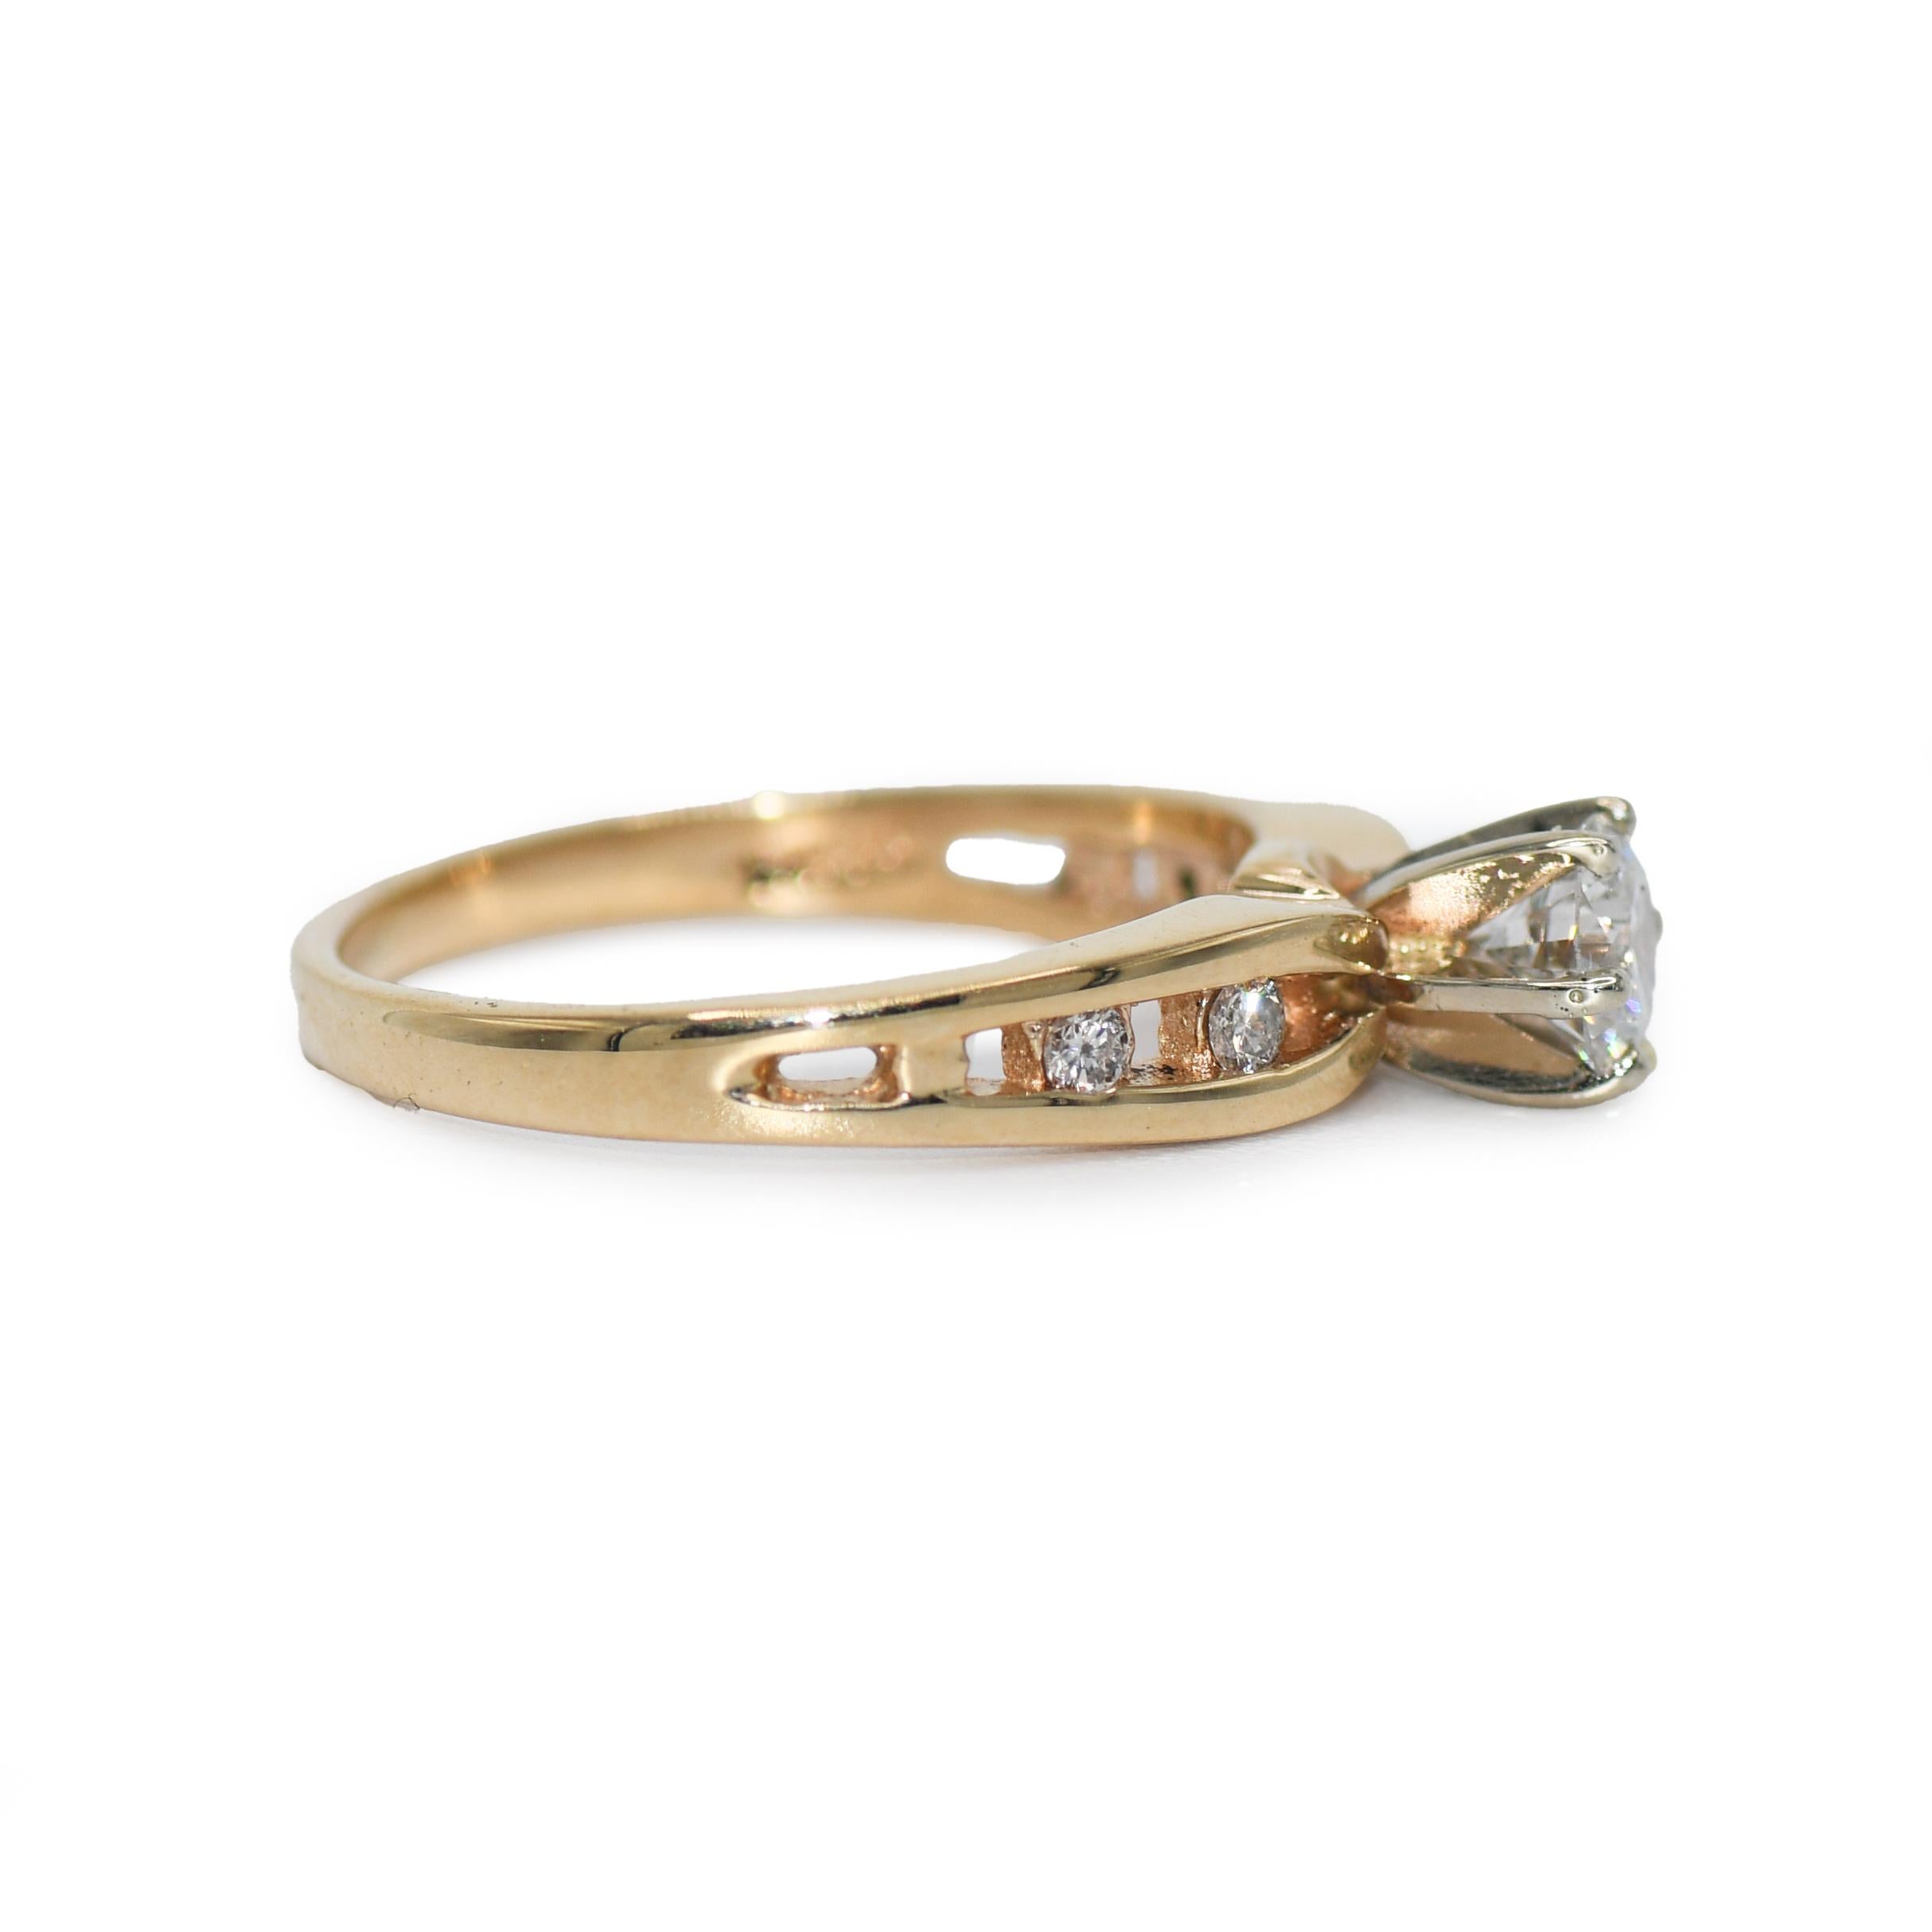 Round Cut 14K Yellow Gold Diamond Ring 0.50 tdw, 3.6g For Sale